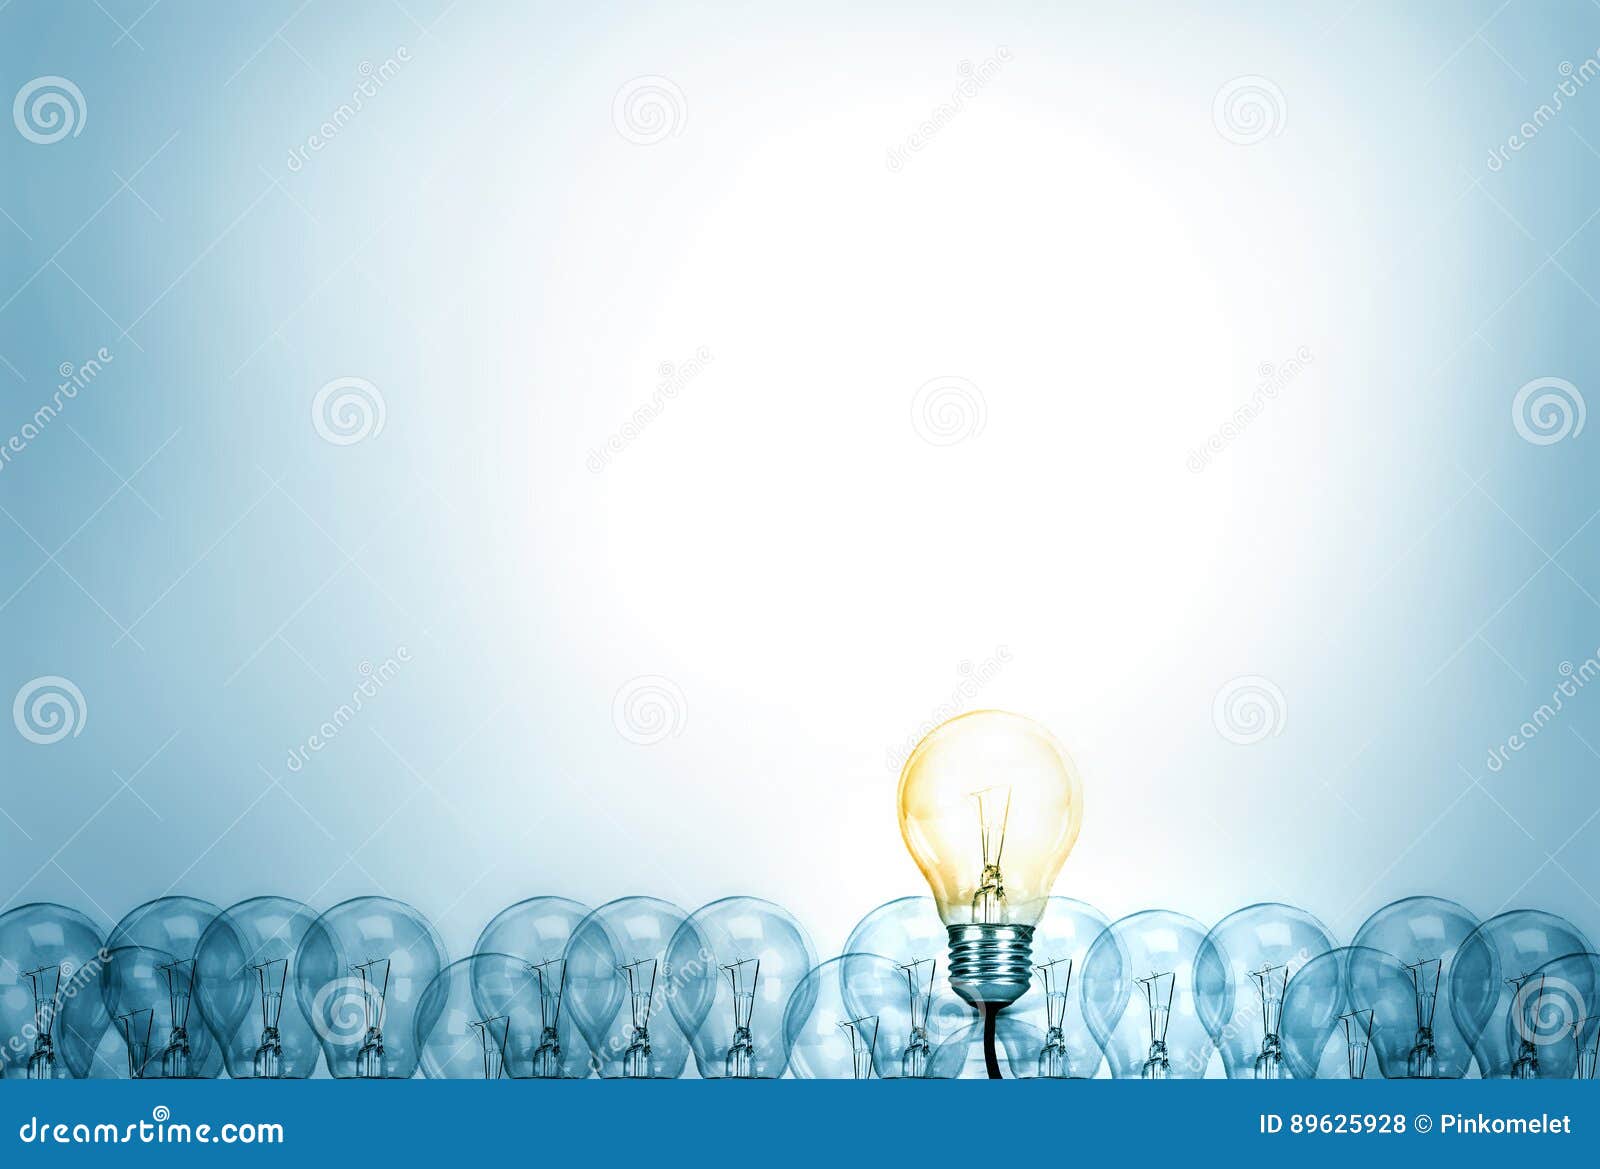 outstanding creative idea background concept . one light bulb glowing among a group light bulbs.